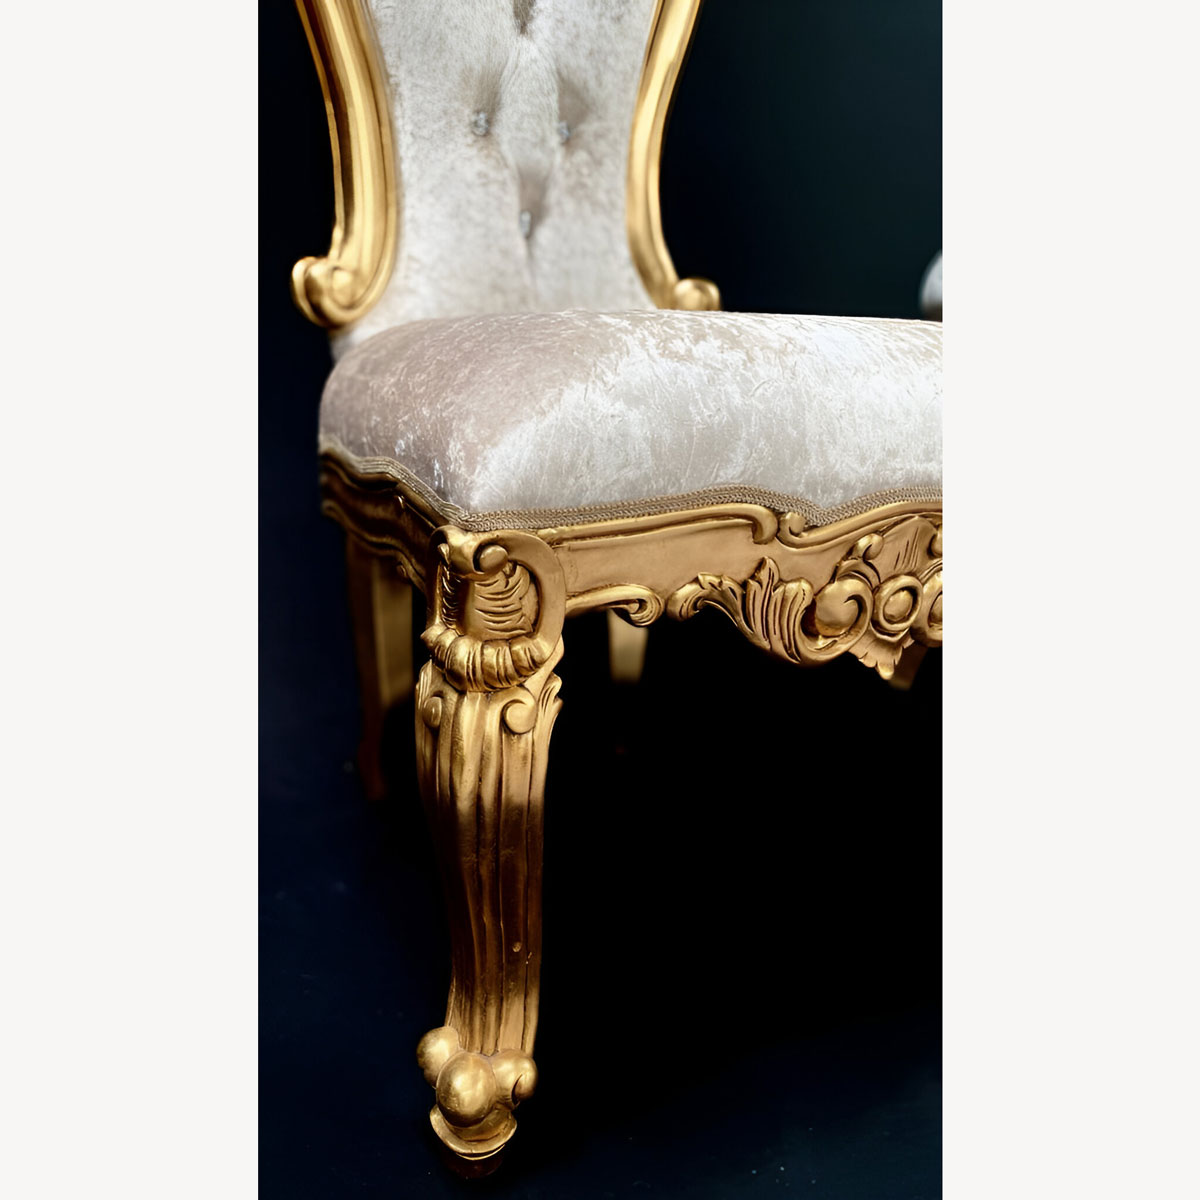 Mayfair Dining Wedding Side Throne In Gold Leaf Frame Upholstered In Ivory Cream Crushed Velvet With Crystal Buttoning 3 - Hampshire Barn Interiors - Mayfair Dining Wedding Side Throne In Gold Leaf Frame Upholstered In Ivory Cream Crushed Velvet With Crystal Buttoning -